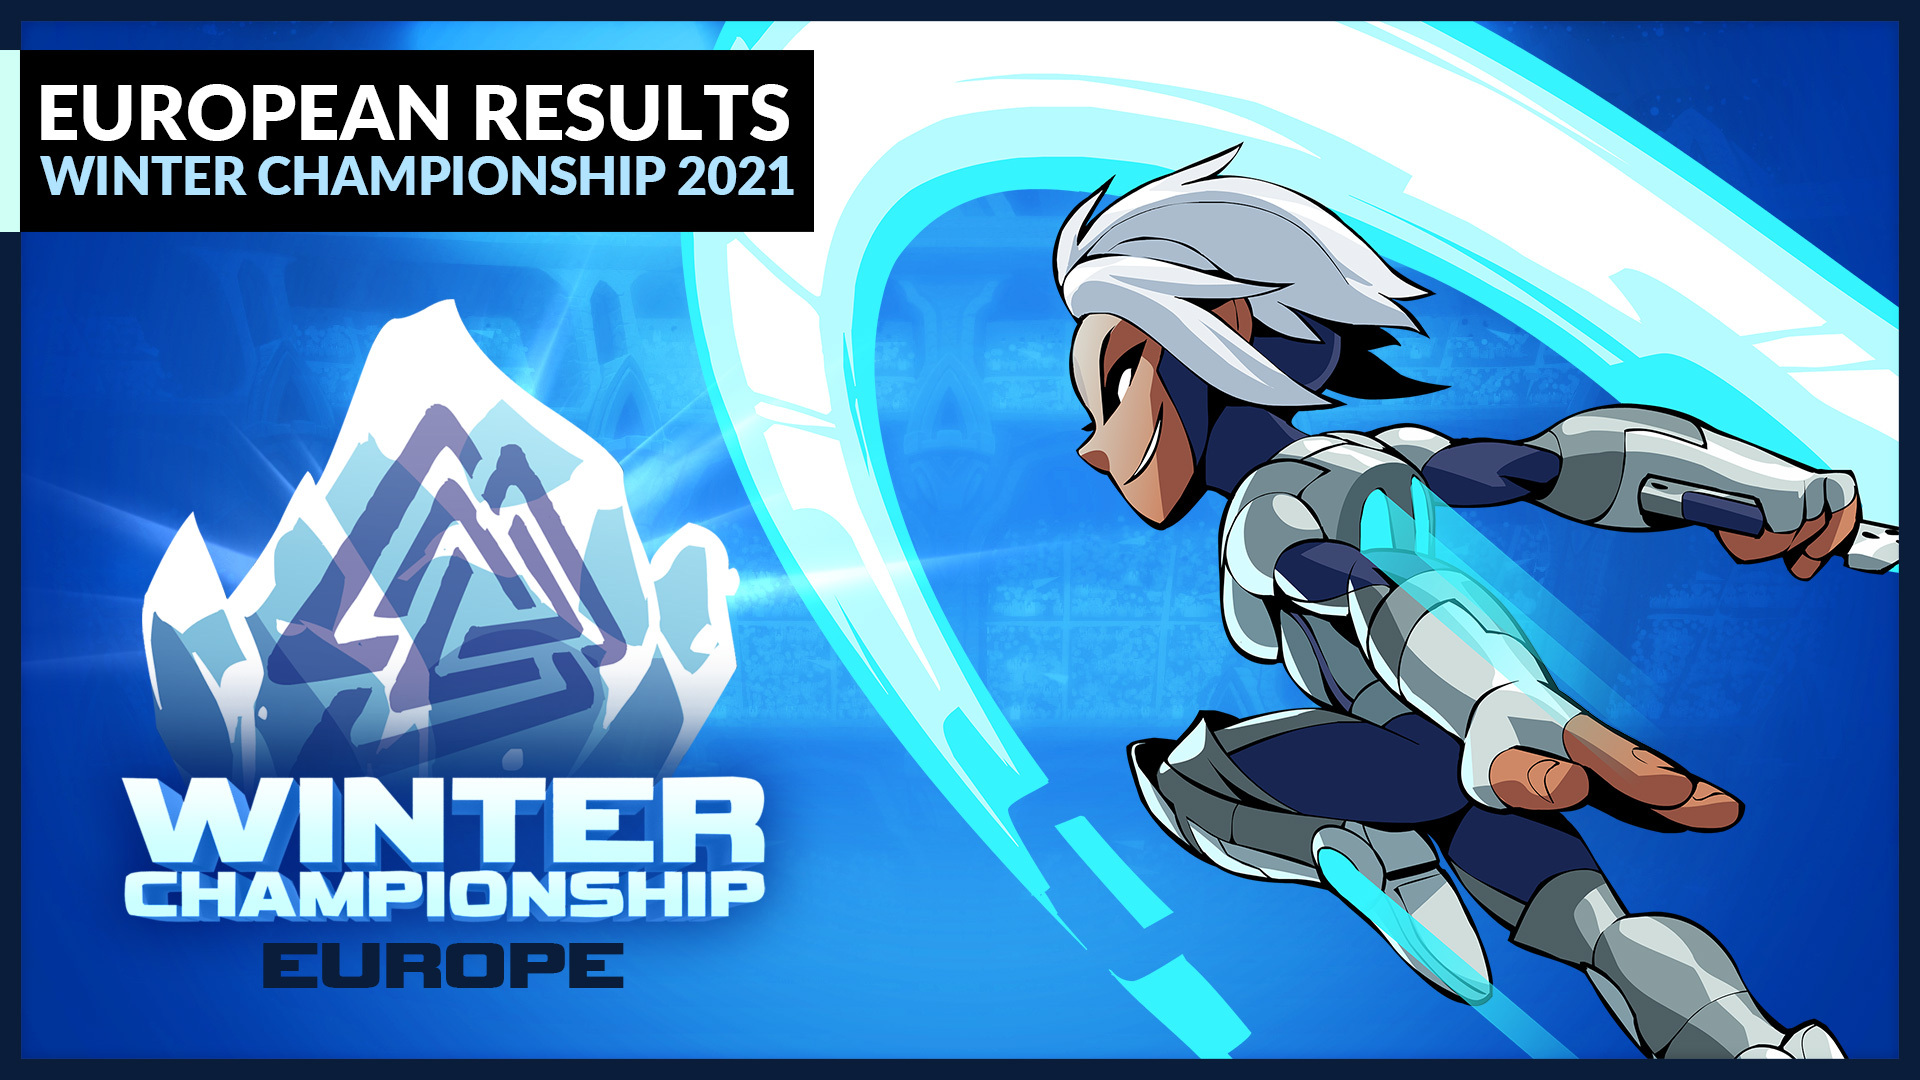 Acno wins Singles and Doubles with his teammate Blaze in the European Winter Championship 2021!